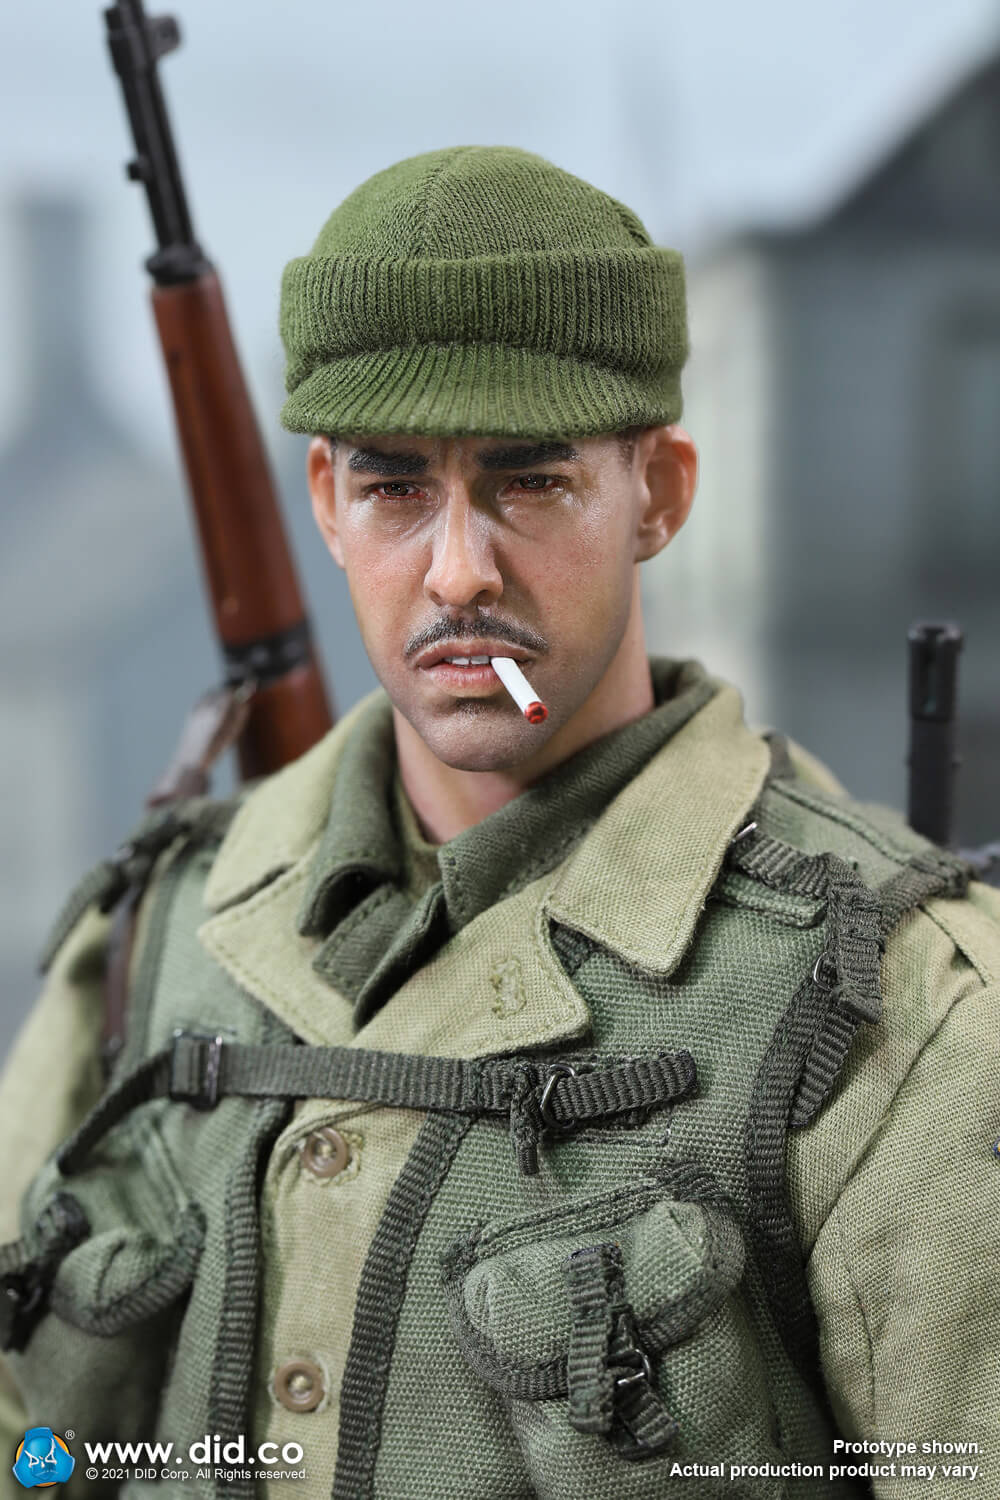 2nddRangerBattalion - NEW PRODUCT: DiD: A80155  WWII US 2nd Ranger Battalion Series 6 – Private Mellish 2960